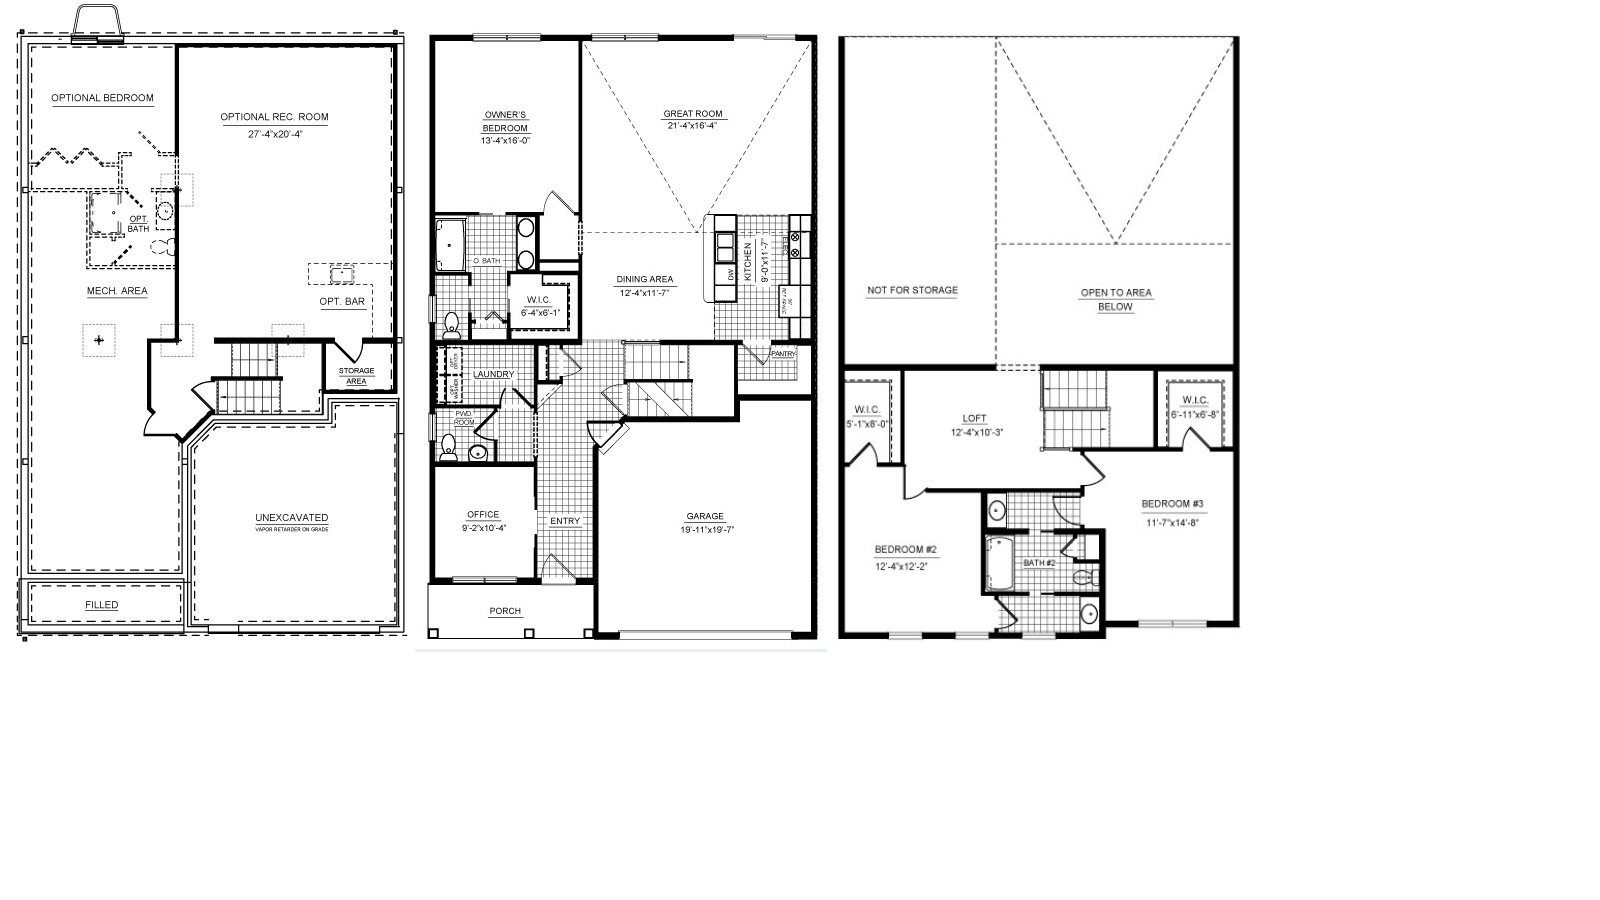 the floor plan for a three story house